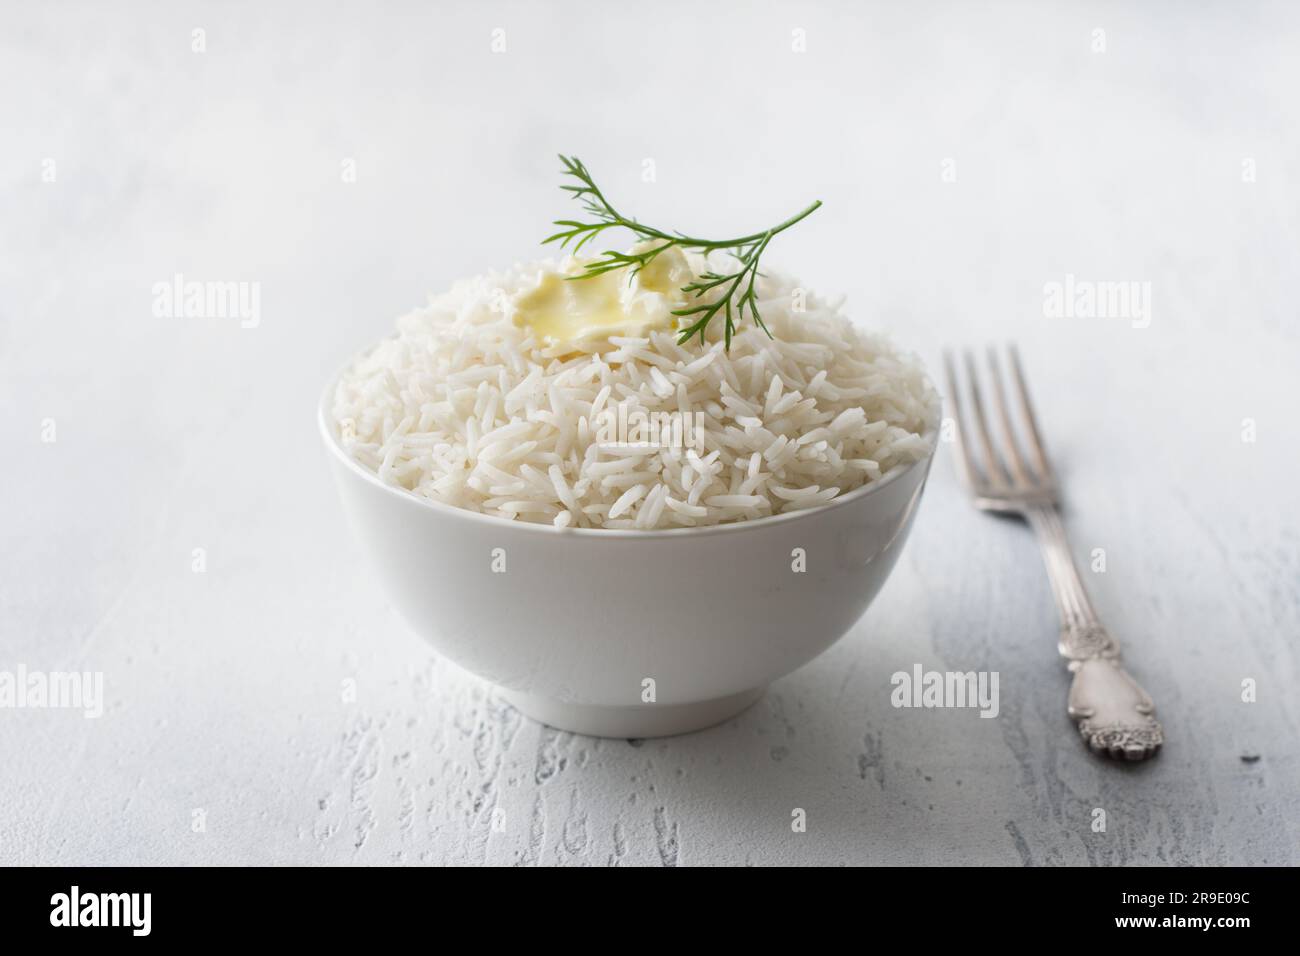 A bowl of steamed long grain rice with butter and a sprig of dill on a light gray background. Stock Photo